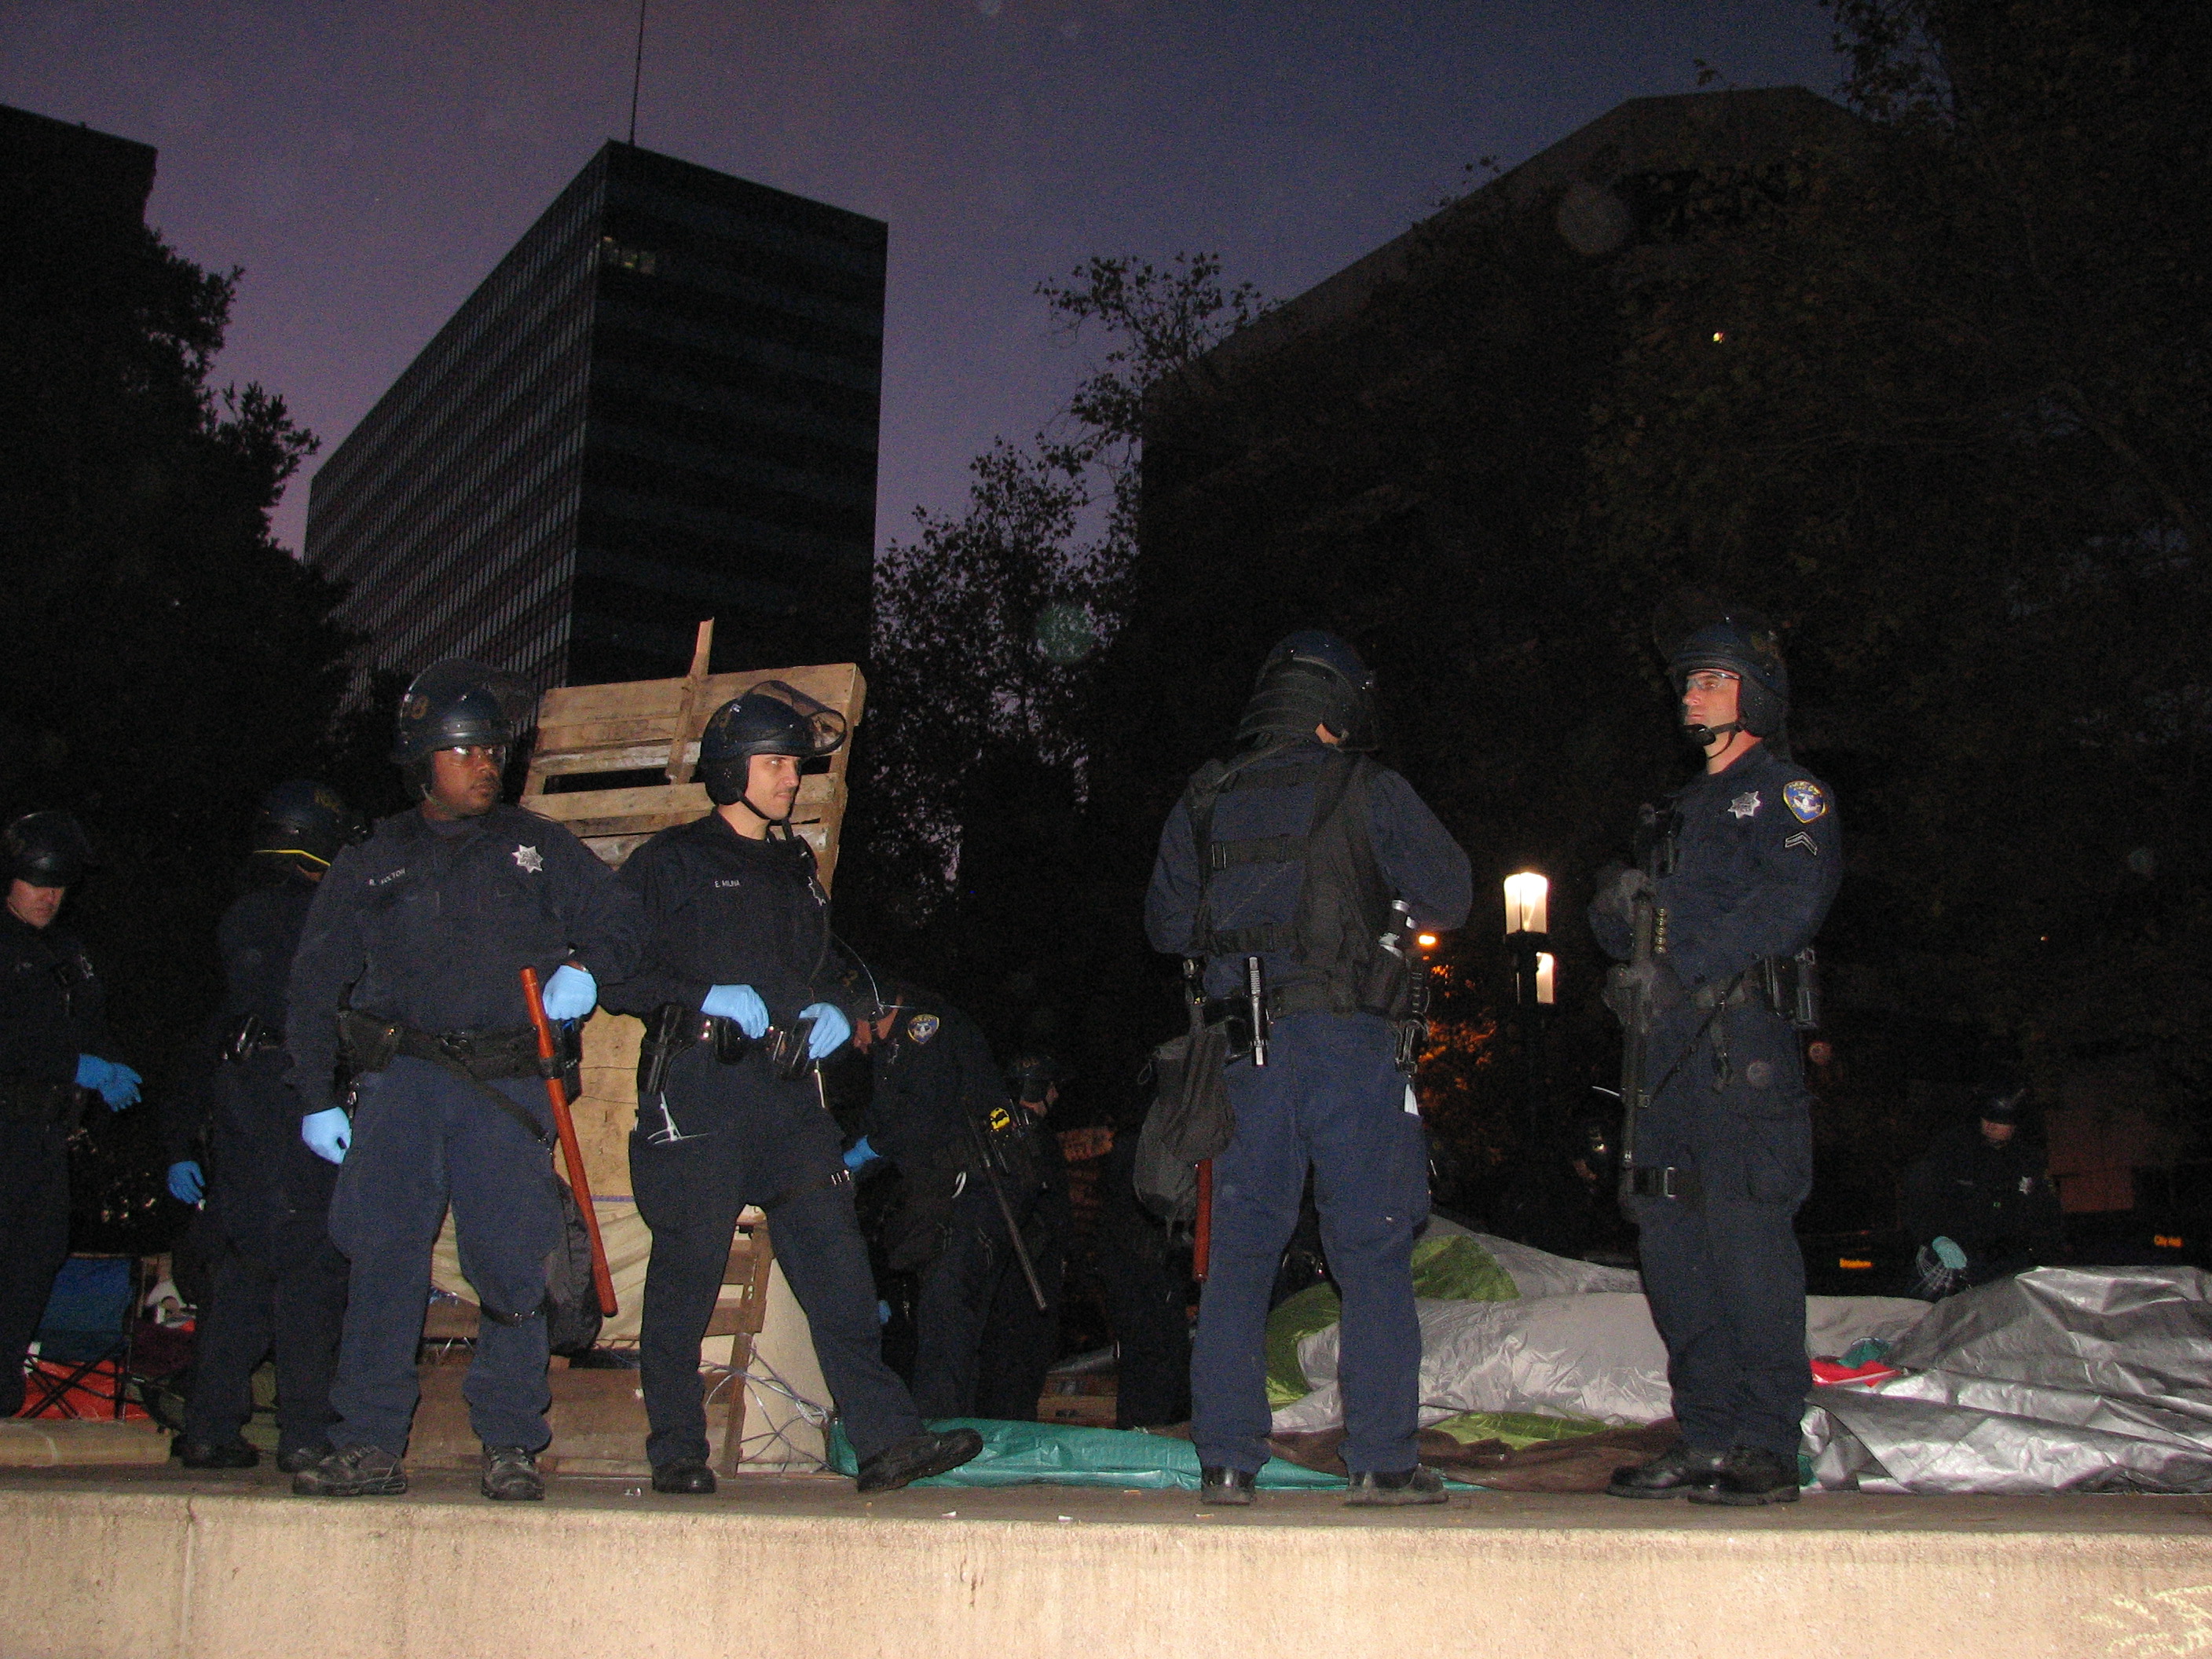 Police raid Occupy Oakland a second time (VIDEO)